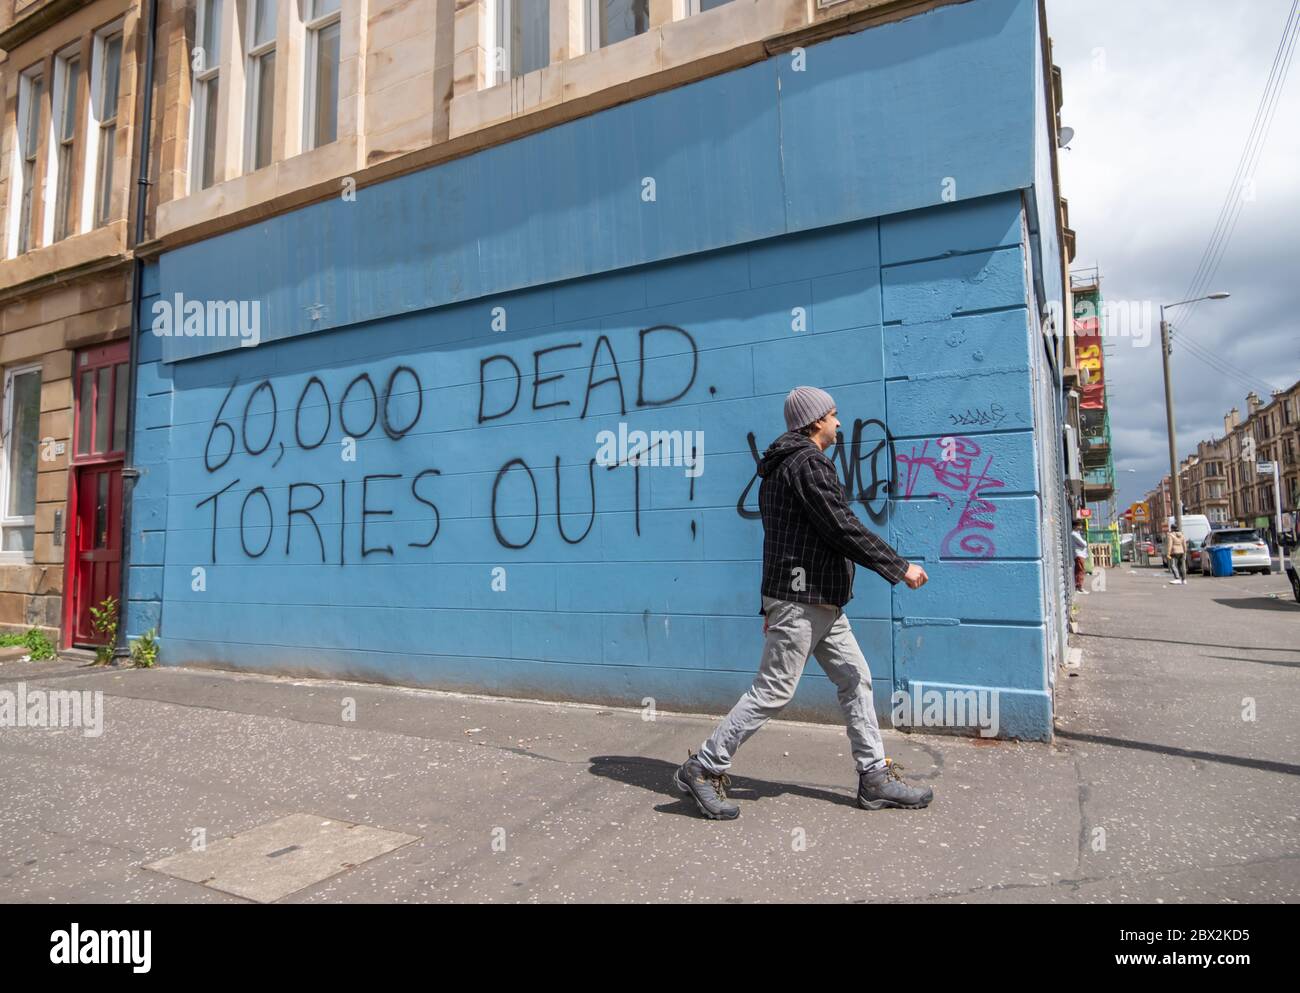 Glasgow, Scotland, UK. 4th June, 2020. Graffiti writing on a wall in Govanhill saying 60,000 Dead. Tories Out! Credit: Skully/Alamy Live News Stock Photo